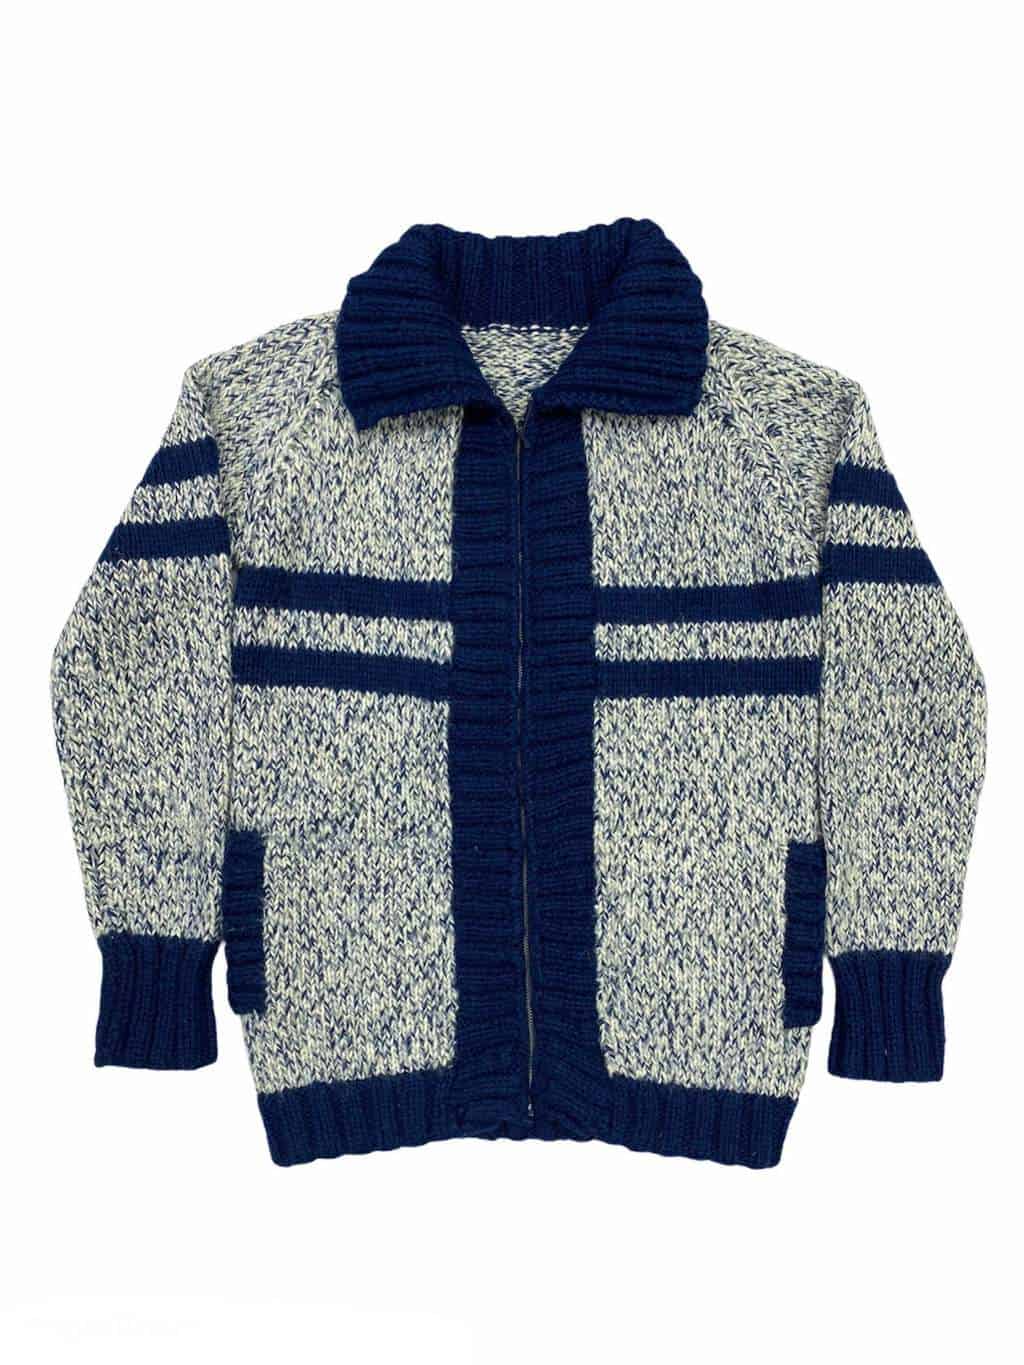 60s Vintage Cardigan Zip Up Front Hand Knitted Navy Blue & White - M